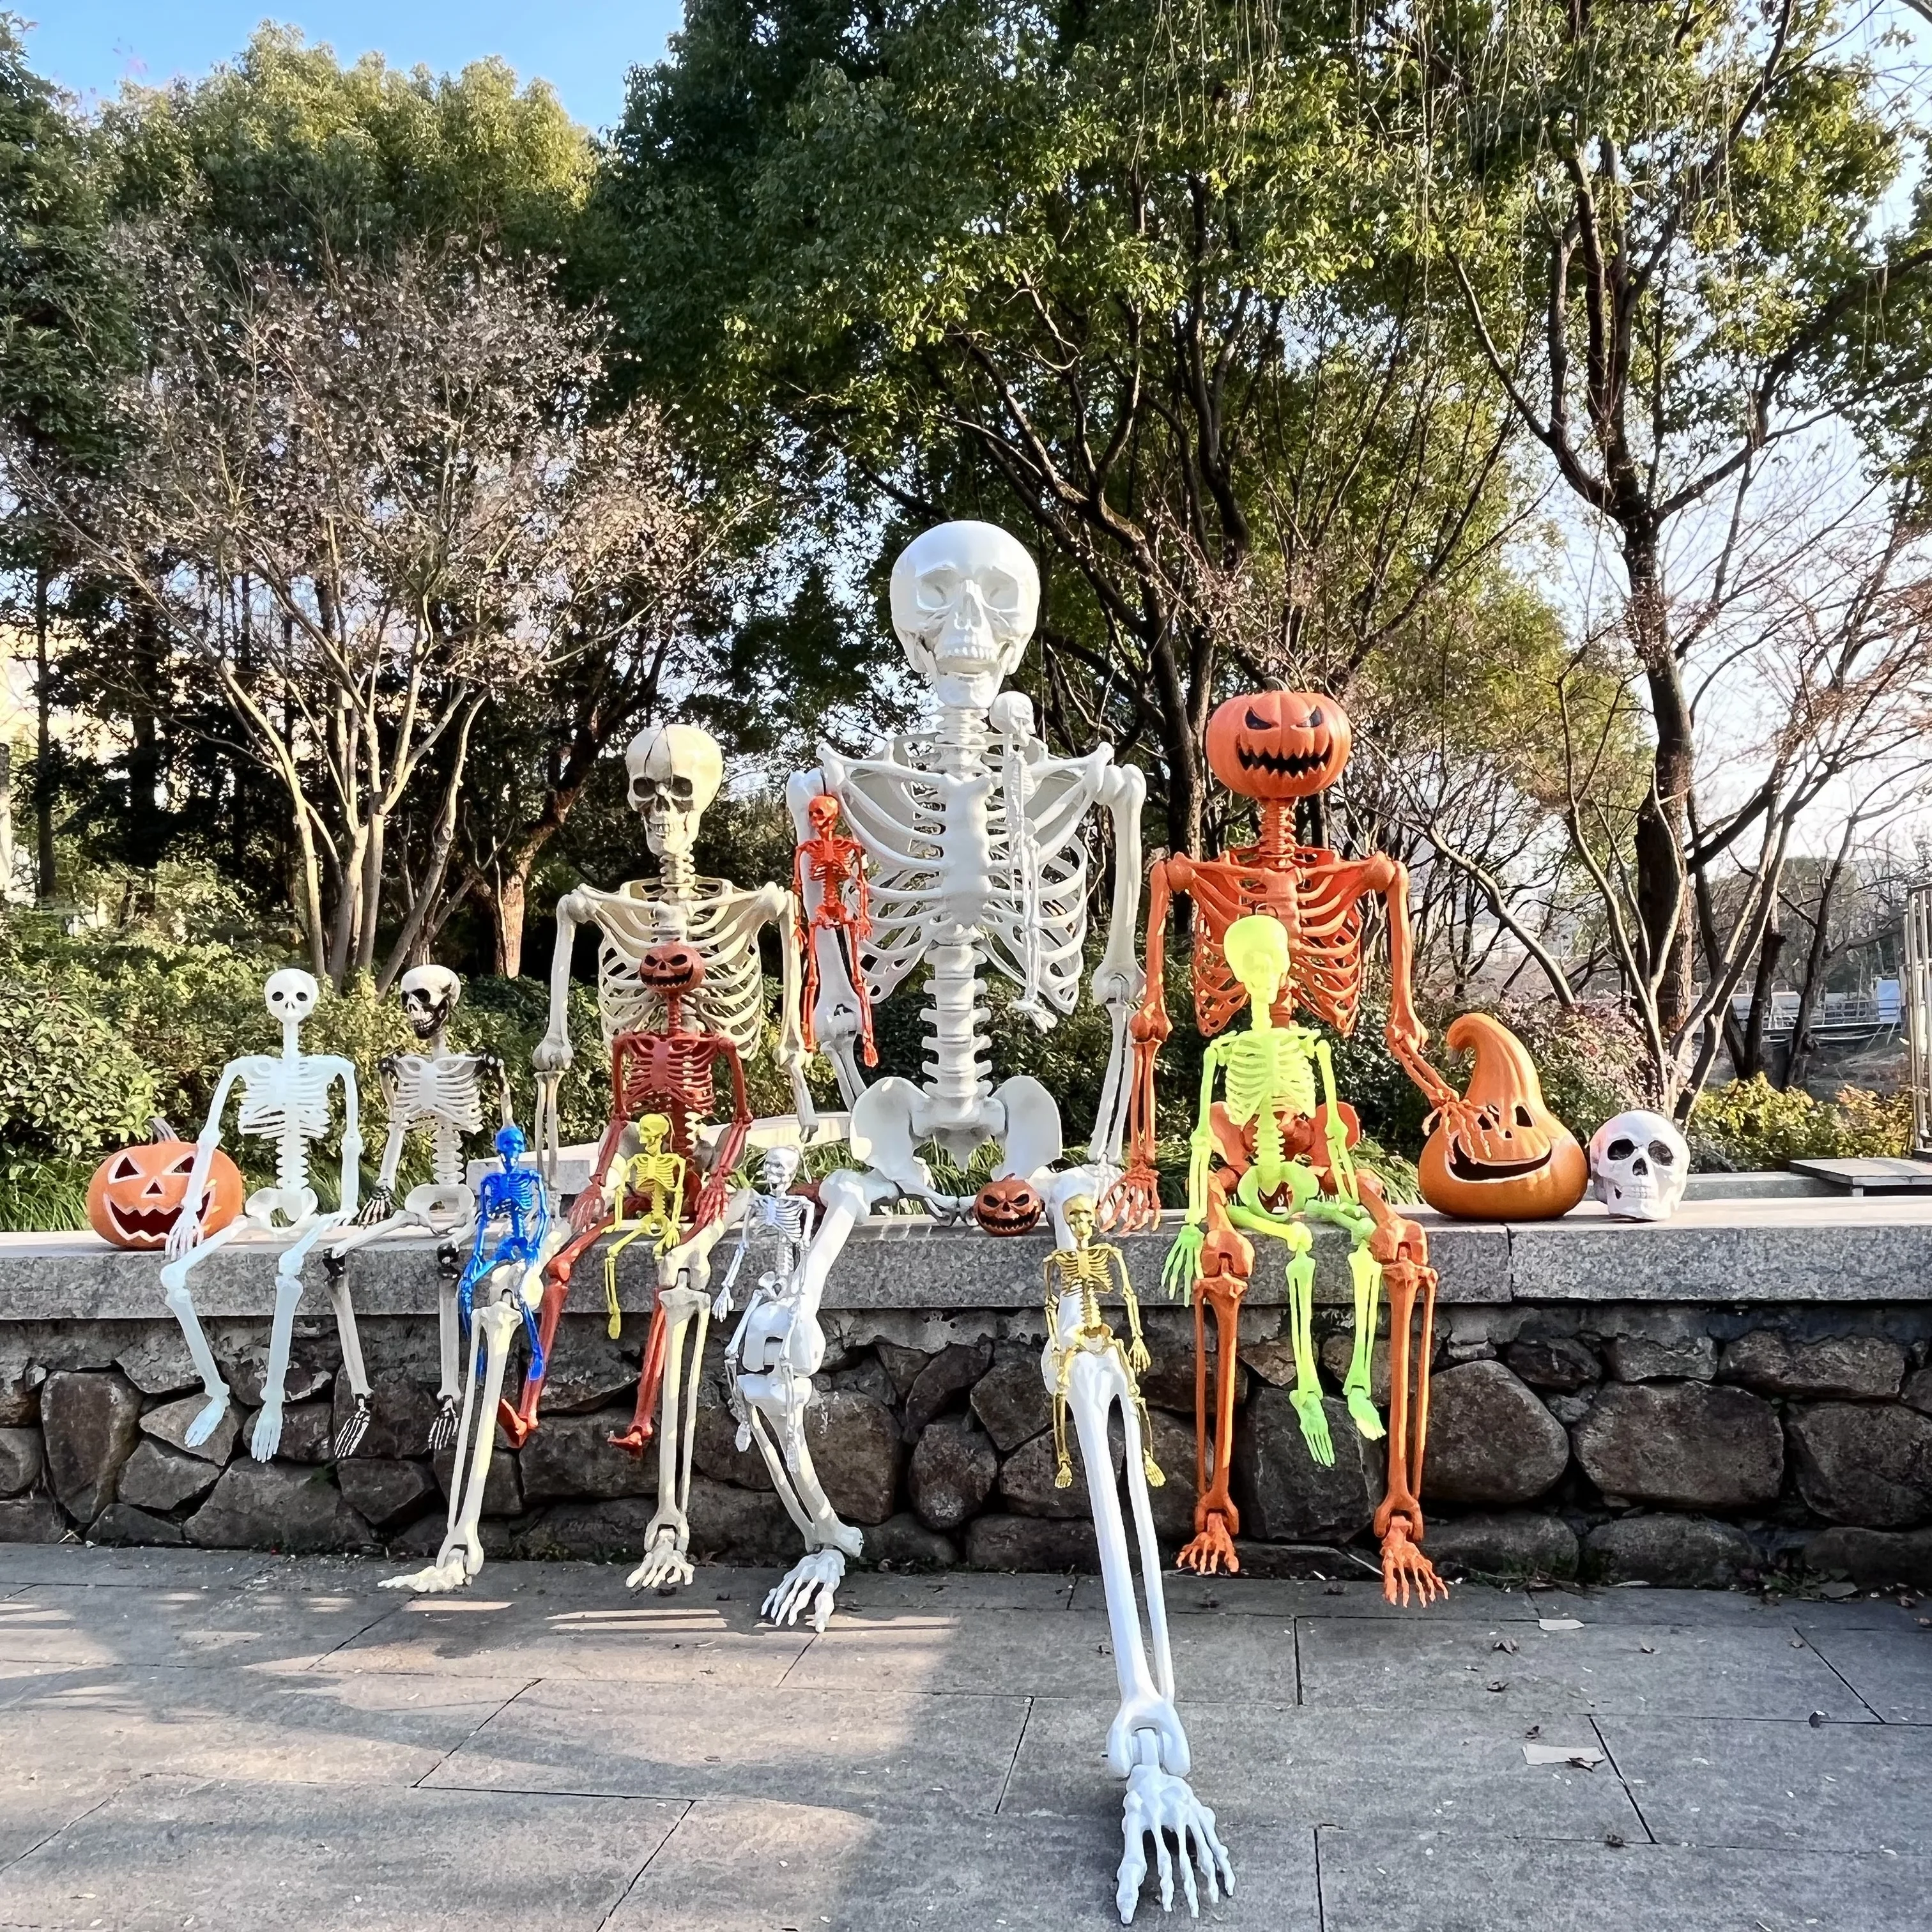 Halloween Prop Pose-N-Stay Realistic Indoor&Outdoor Accessories Human Halloween Skeletons For Holidays Decoration